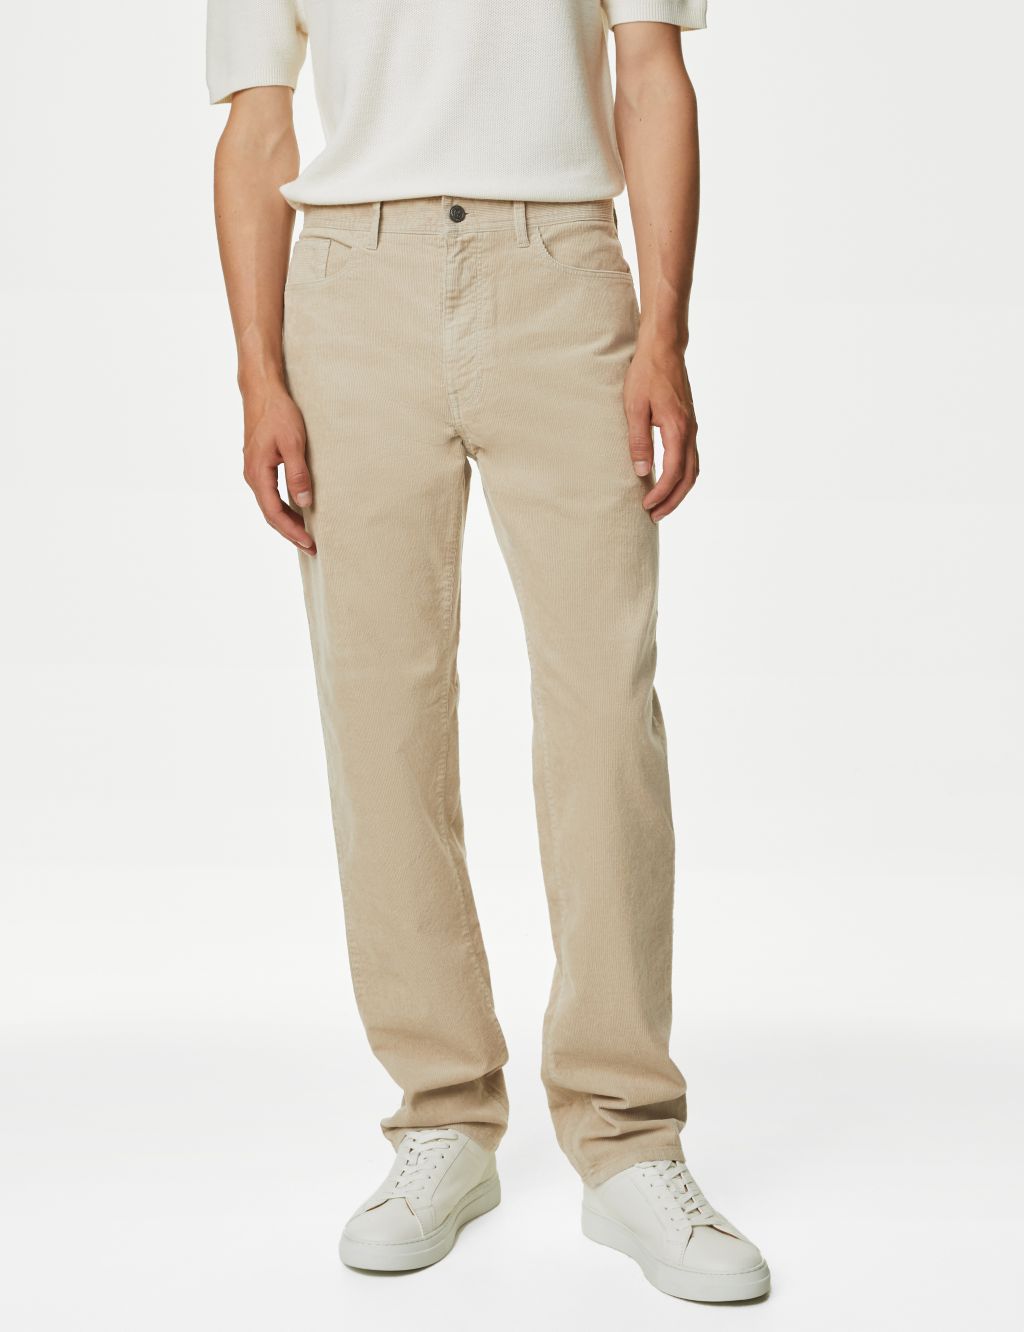 Straight Fit Corduroy 5 Pocket Trousers image 1